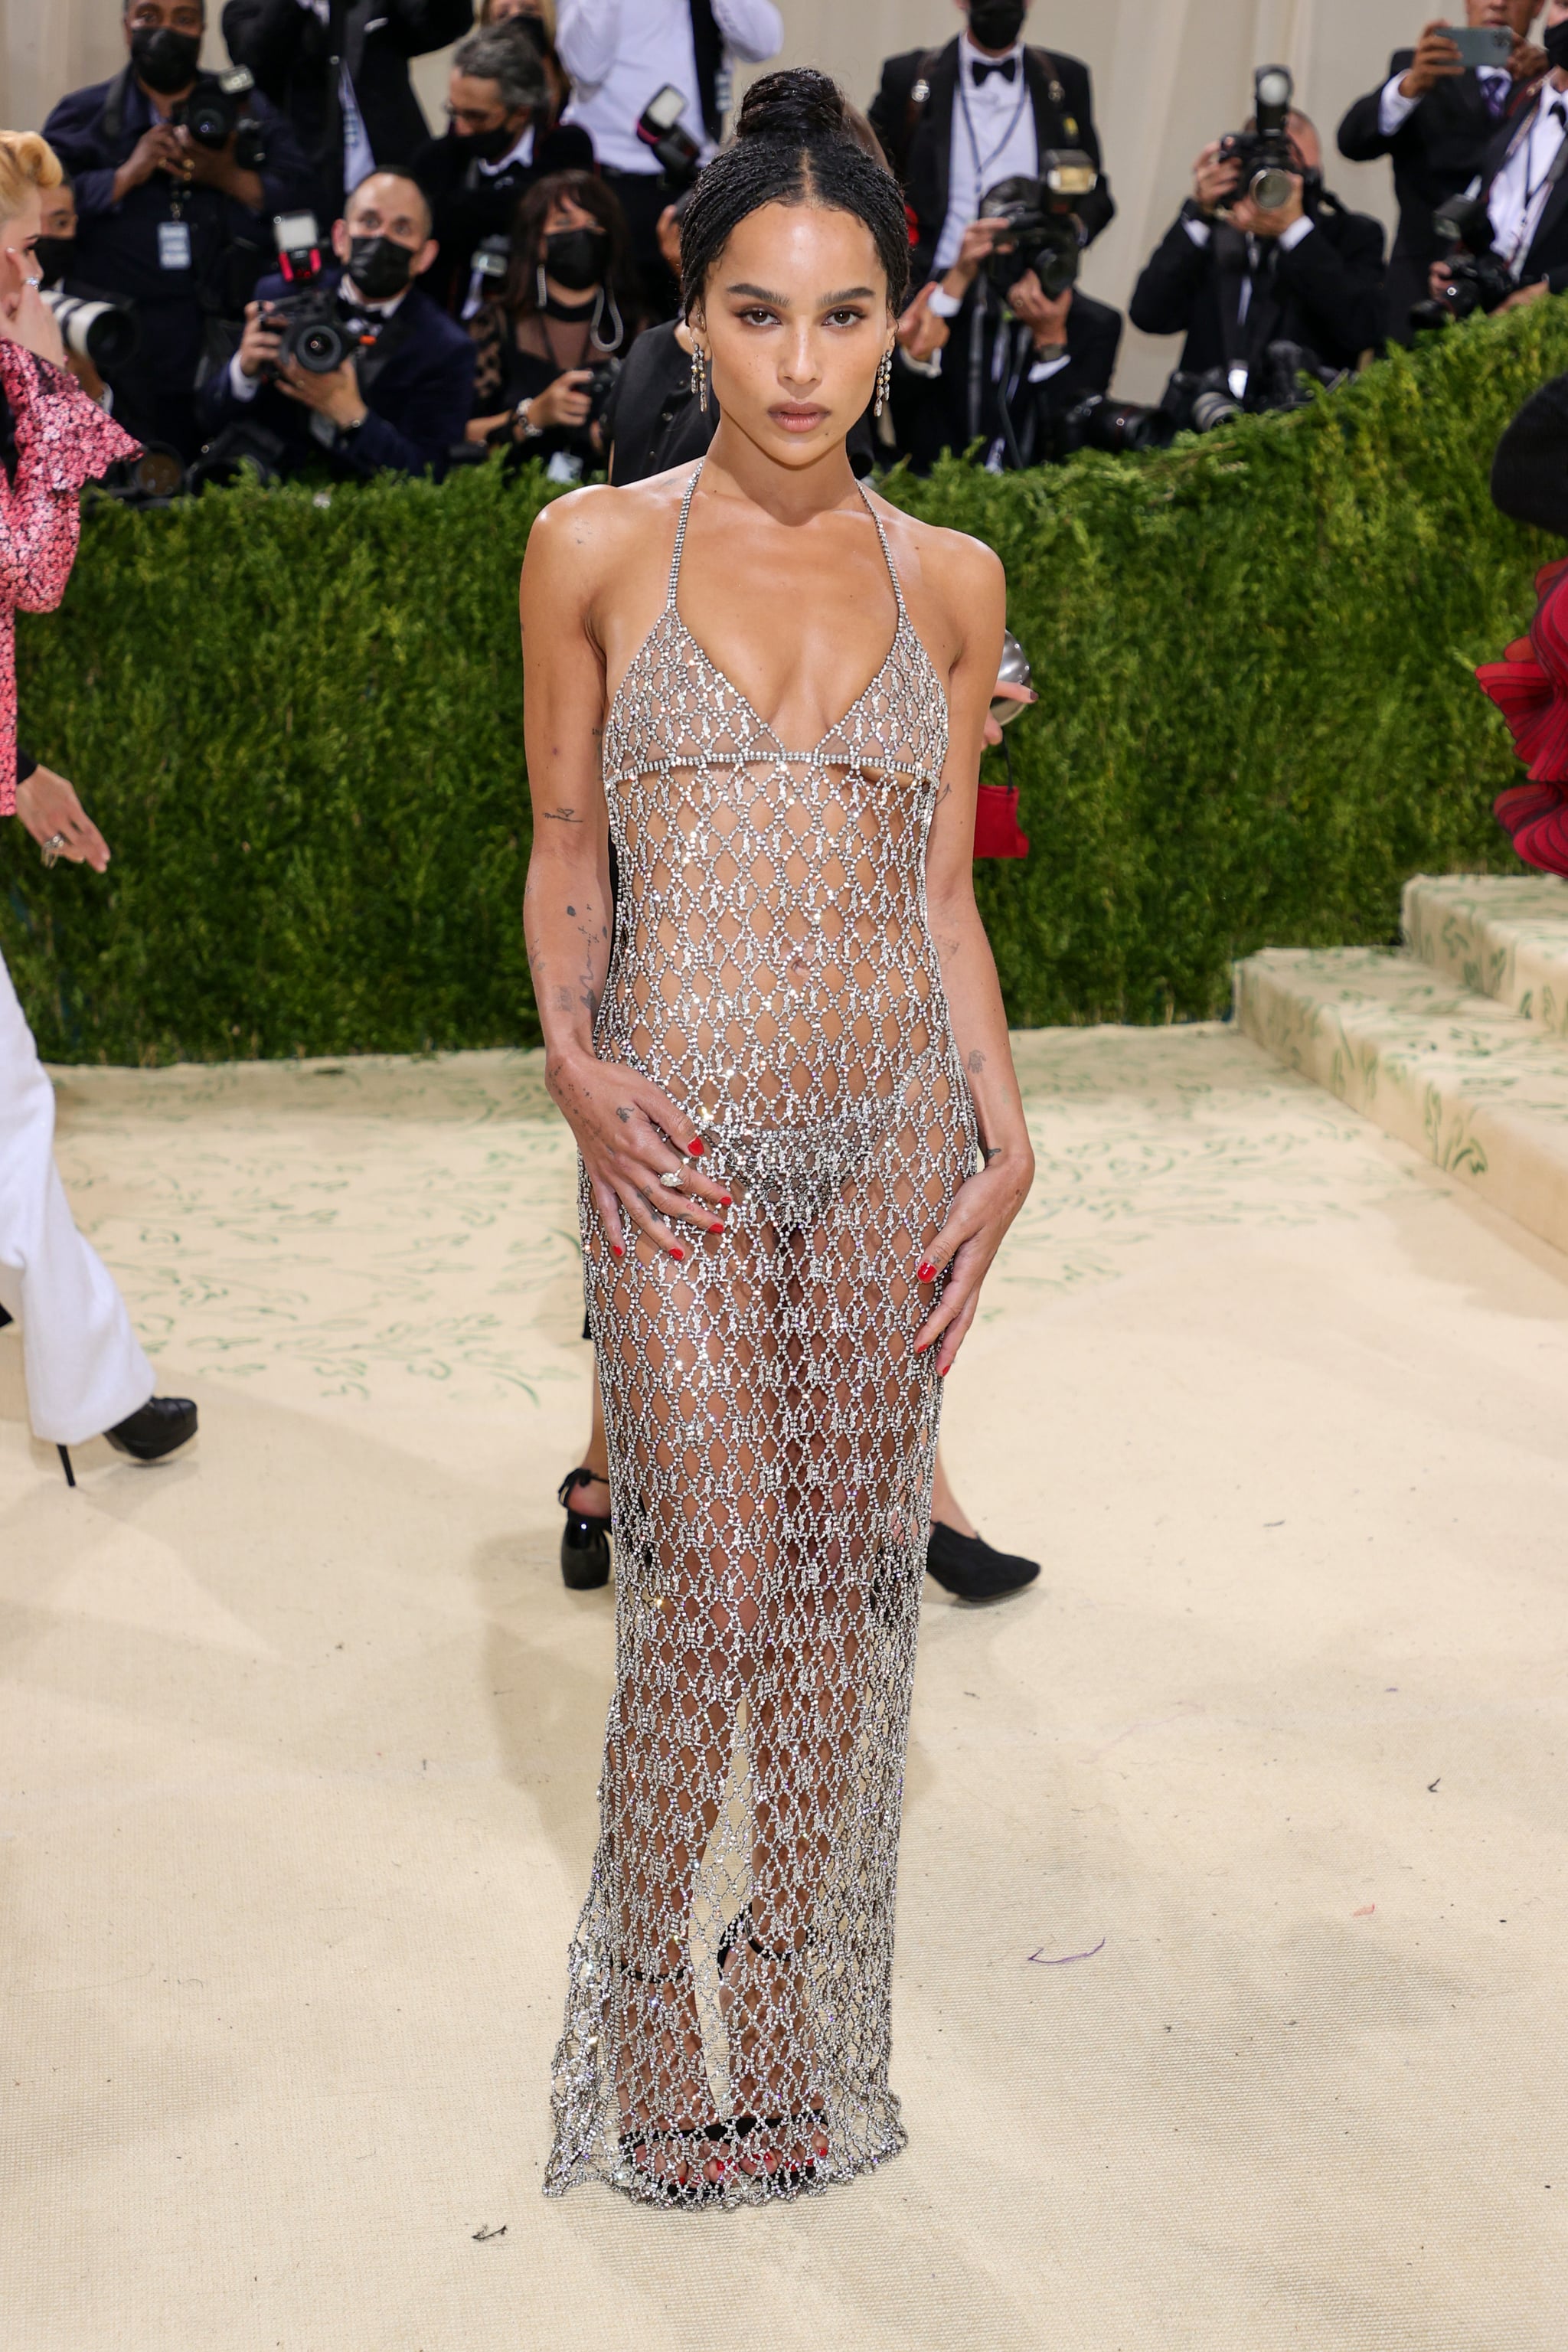 Zoë Kravitz at the 2021 Met Gala | Every Look From the 2021 Met Gala Red Carpet That We Can&#39;t Stop Talking About | POPSUGAR Fashion Photo 147